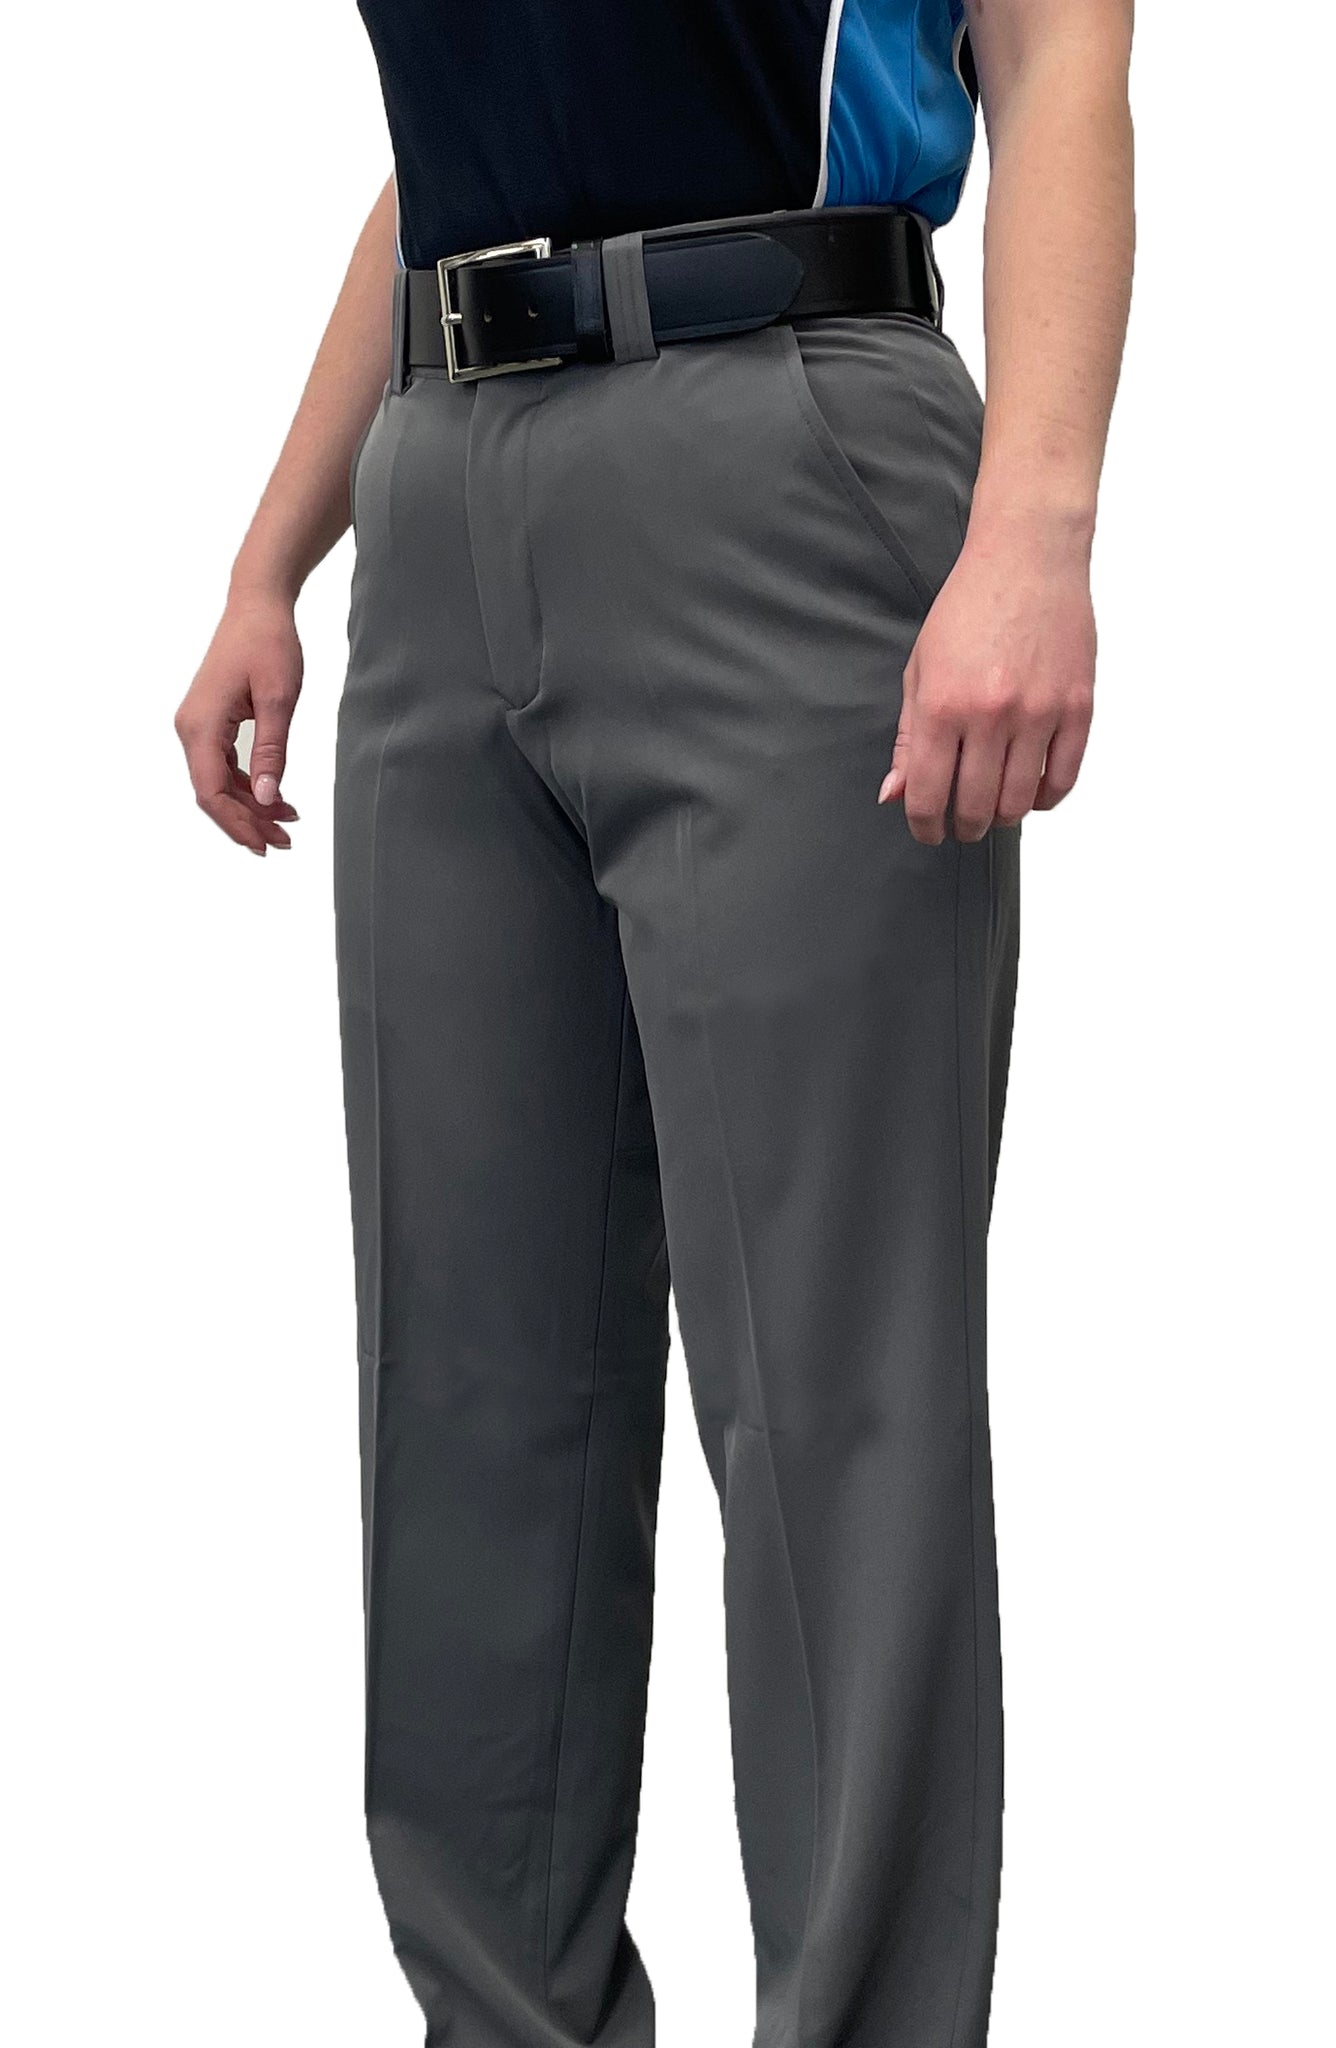 BBS360HG - "NEW" Women's Smitty "4-Way Stretch" FLAT FRONT COMBO PANTS with SLASH POCKETS "NON-EXPANDER"- HEATHER GREY